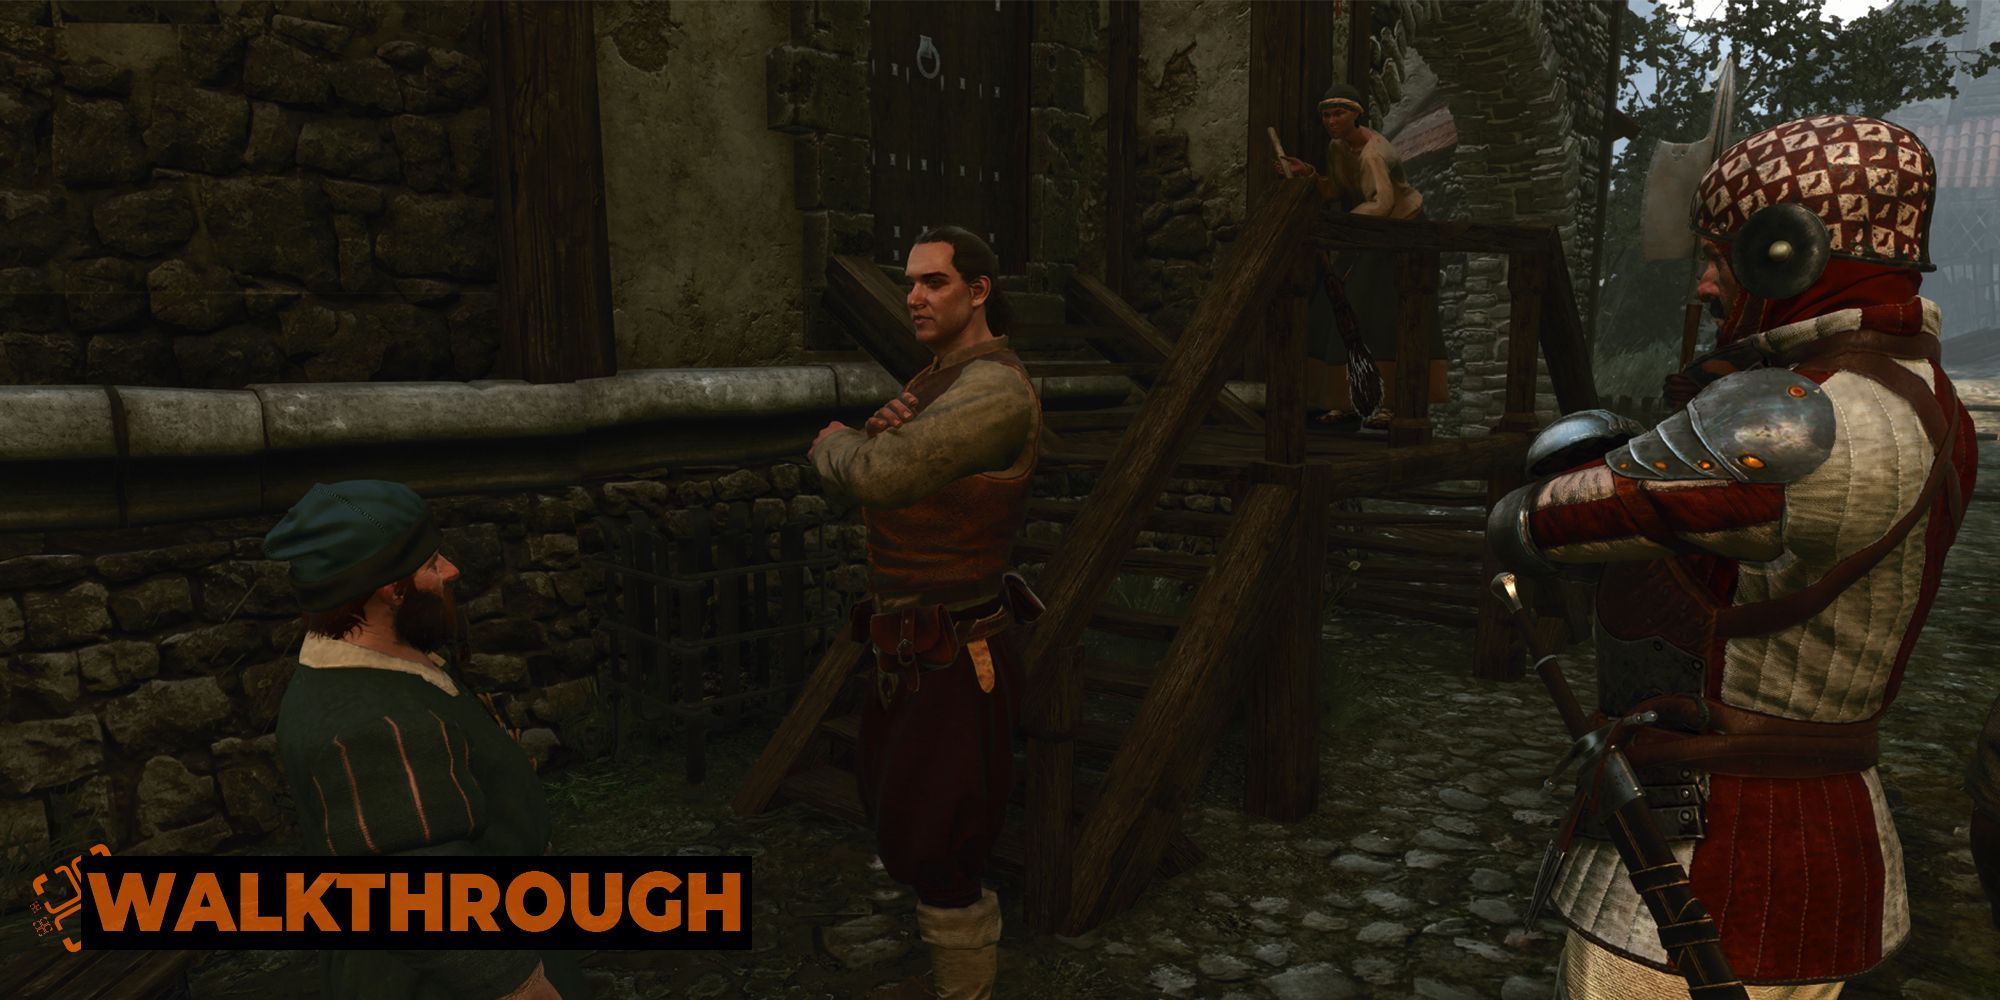 A pair of merchants, one human and one dwarf, glare at each other outside a Novigrad Warehouse in The Witcher 3.